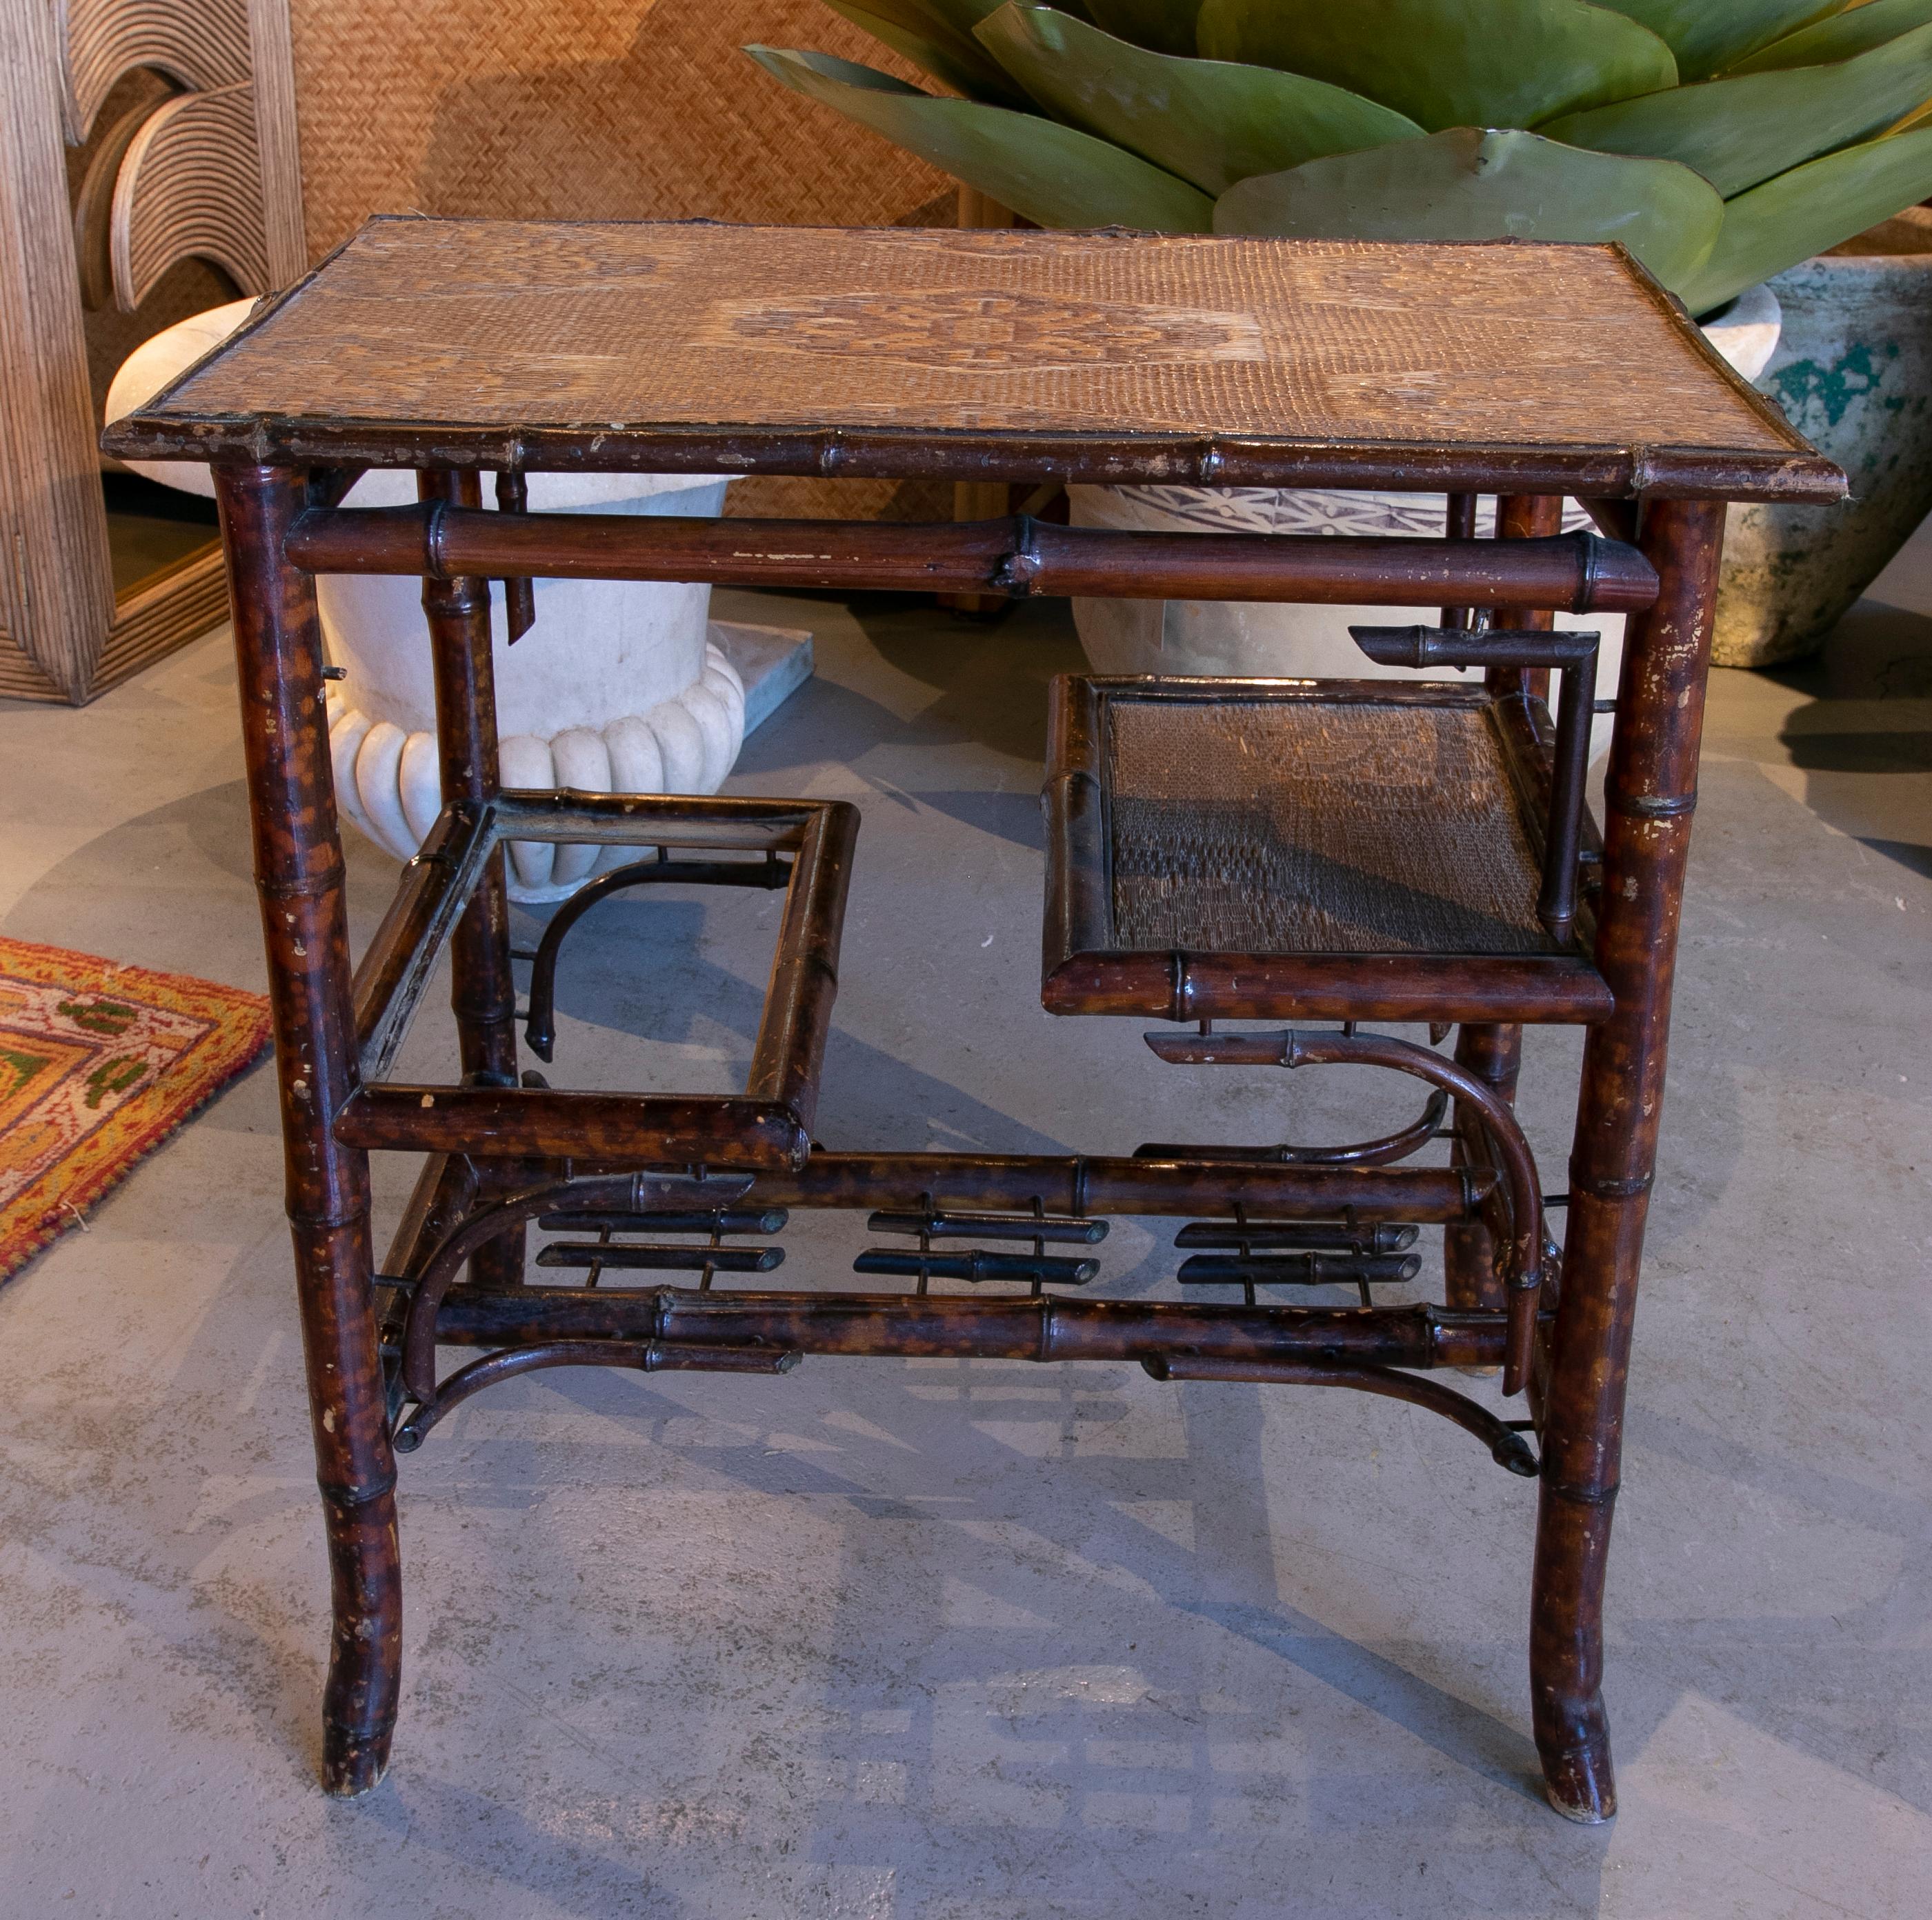 Chinese Bamboo Sidetable with Wicker Shelves and Top from the 1950ies For Sale 2